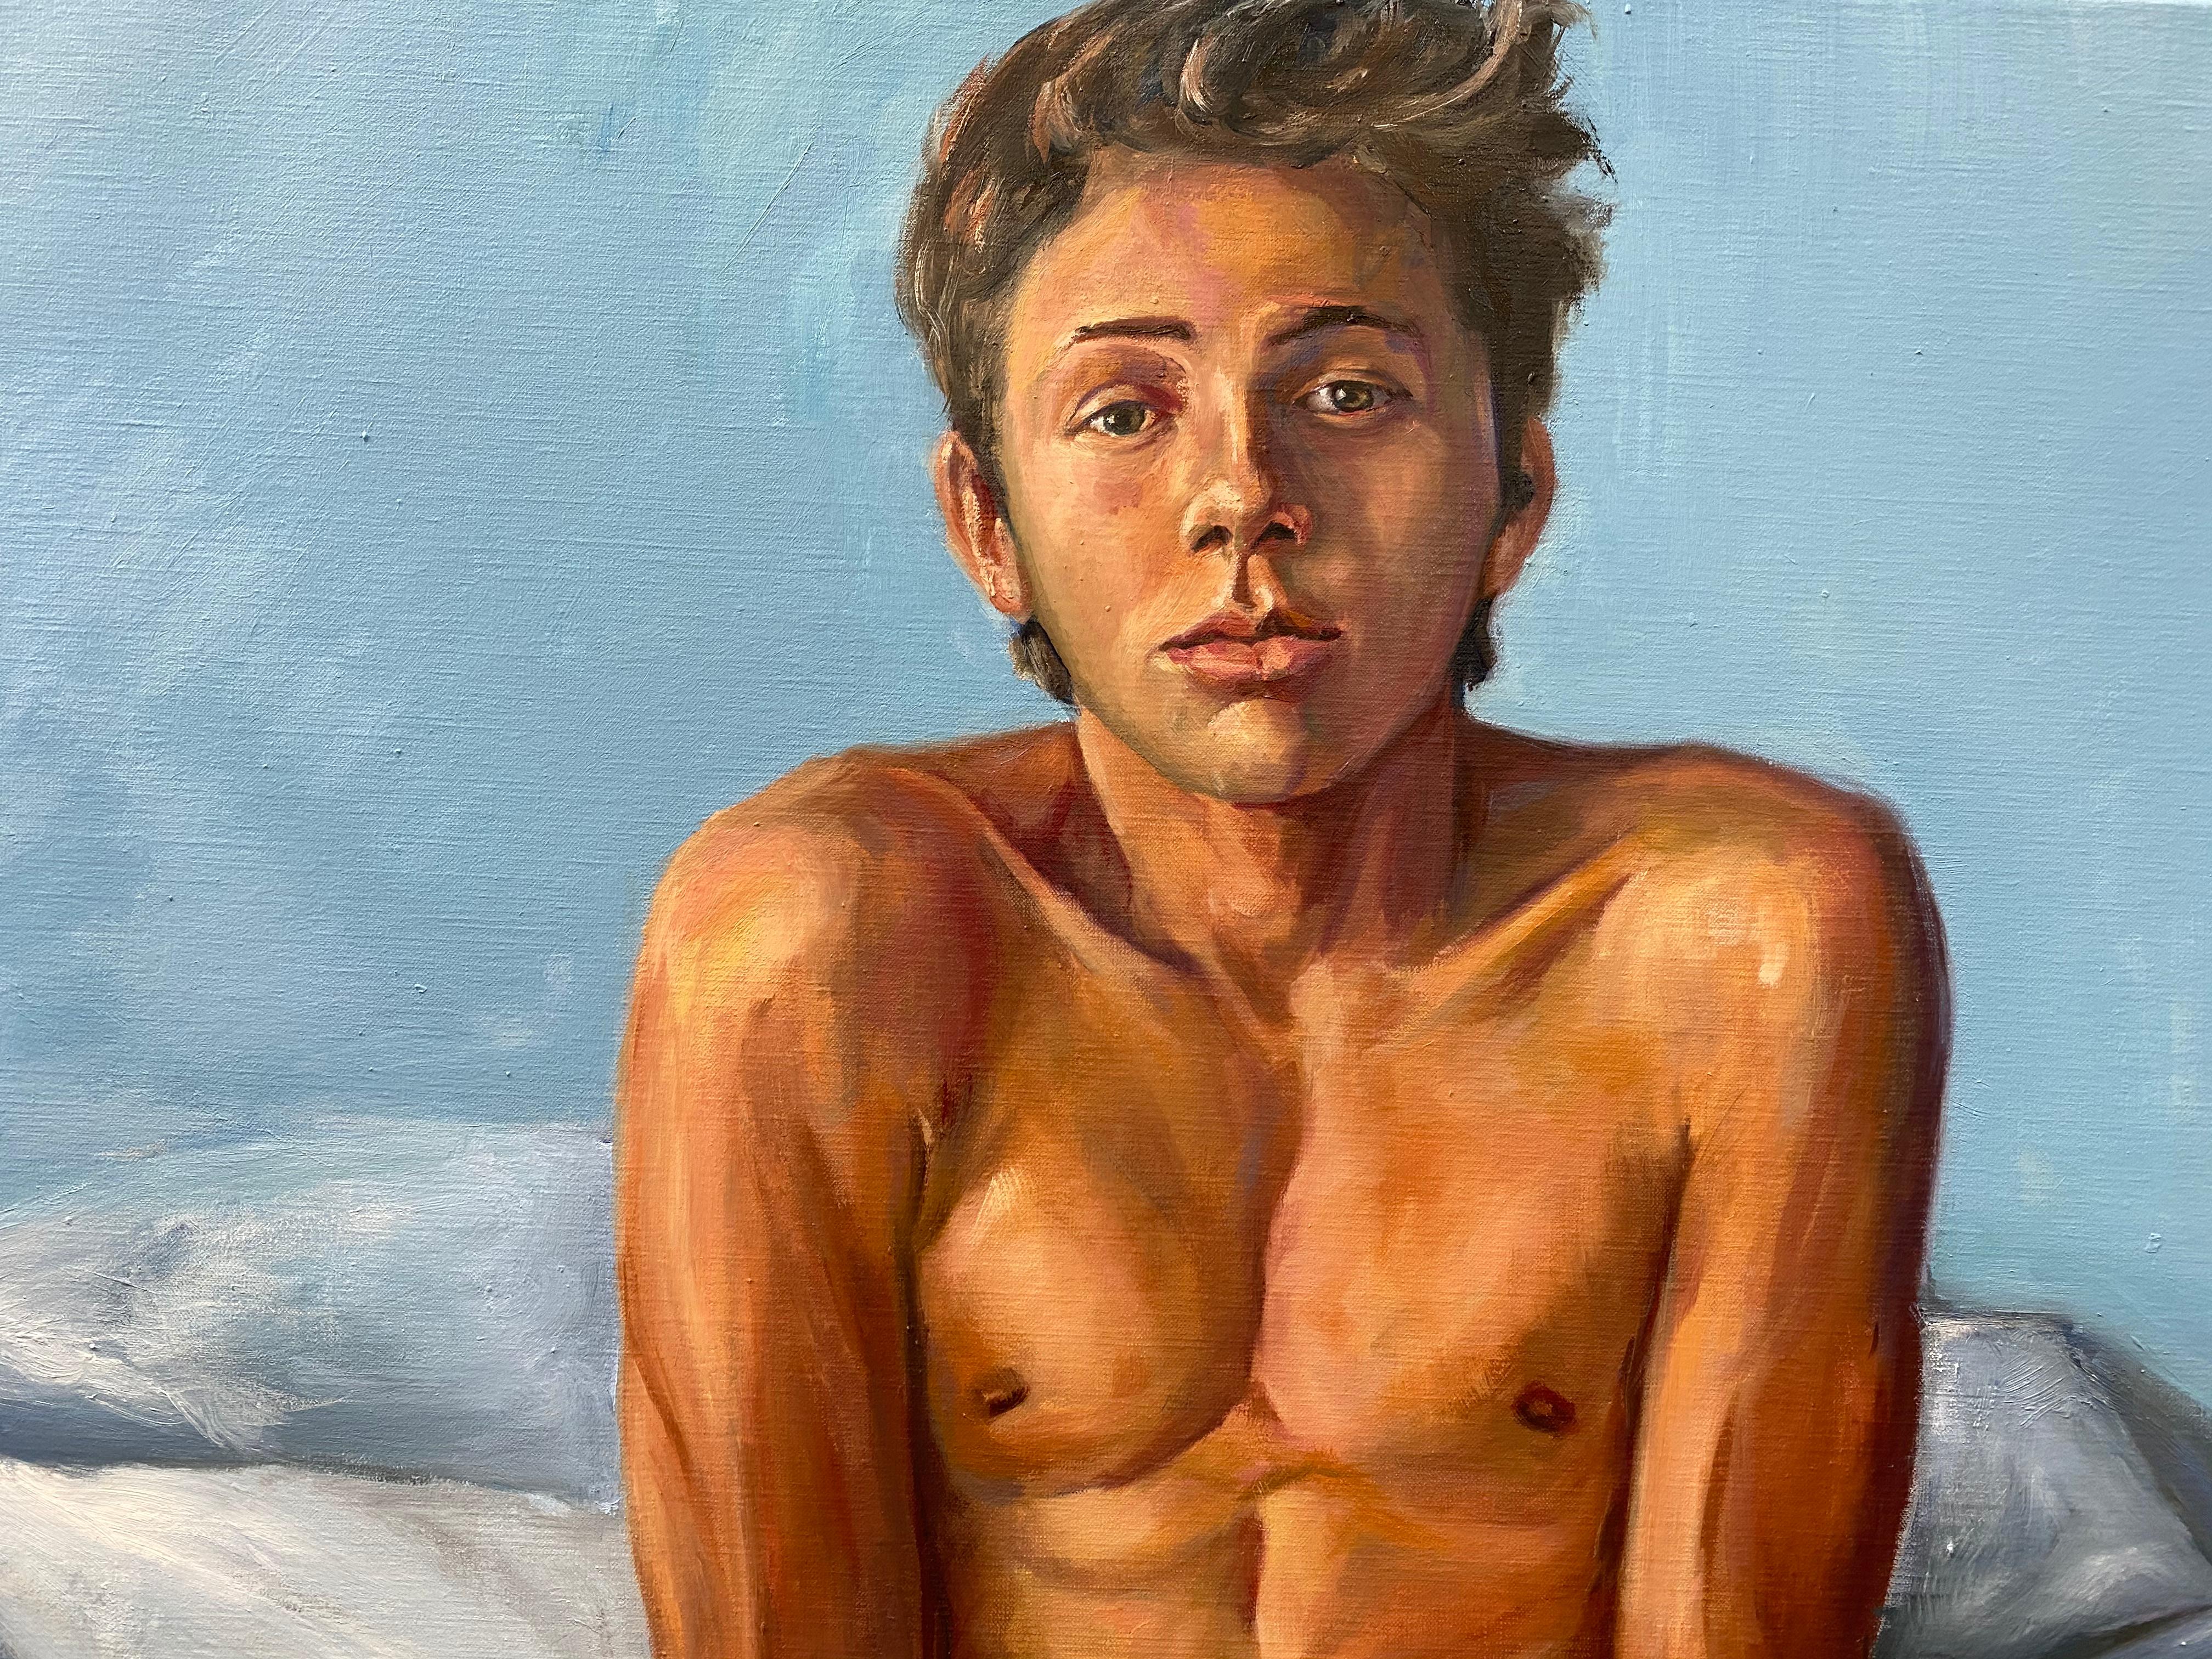 Bedroom-21st Century Figurative painting of a nude boy  - Contemporary Painting by David van der Linden